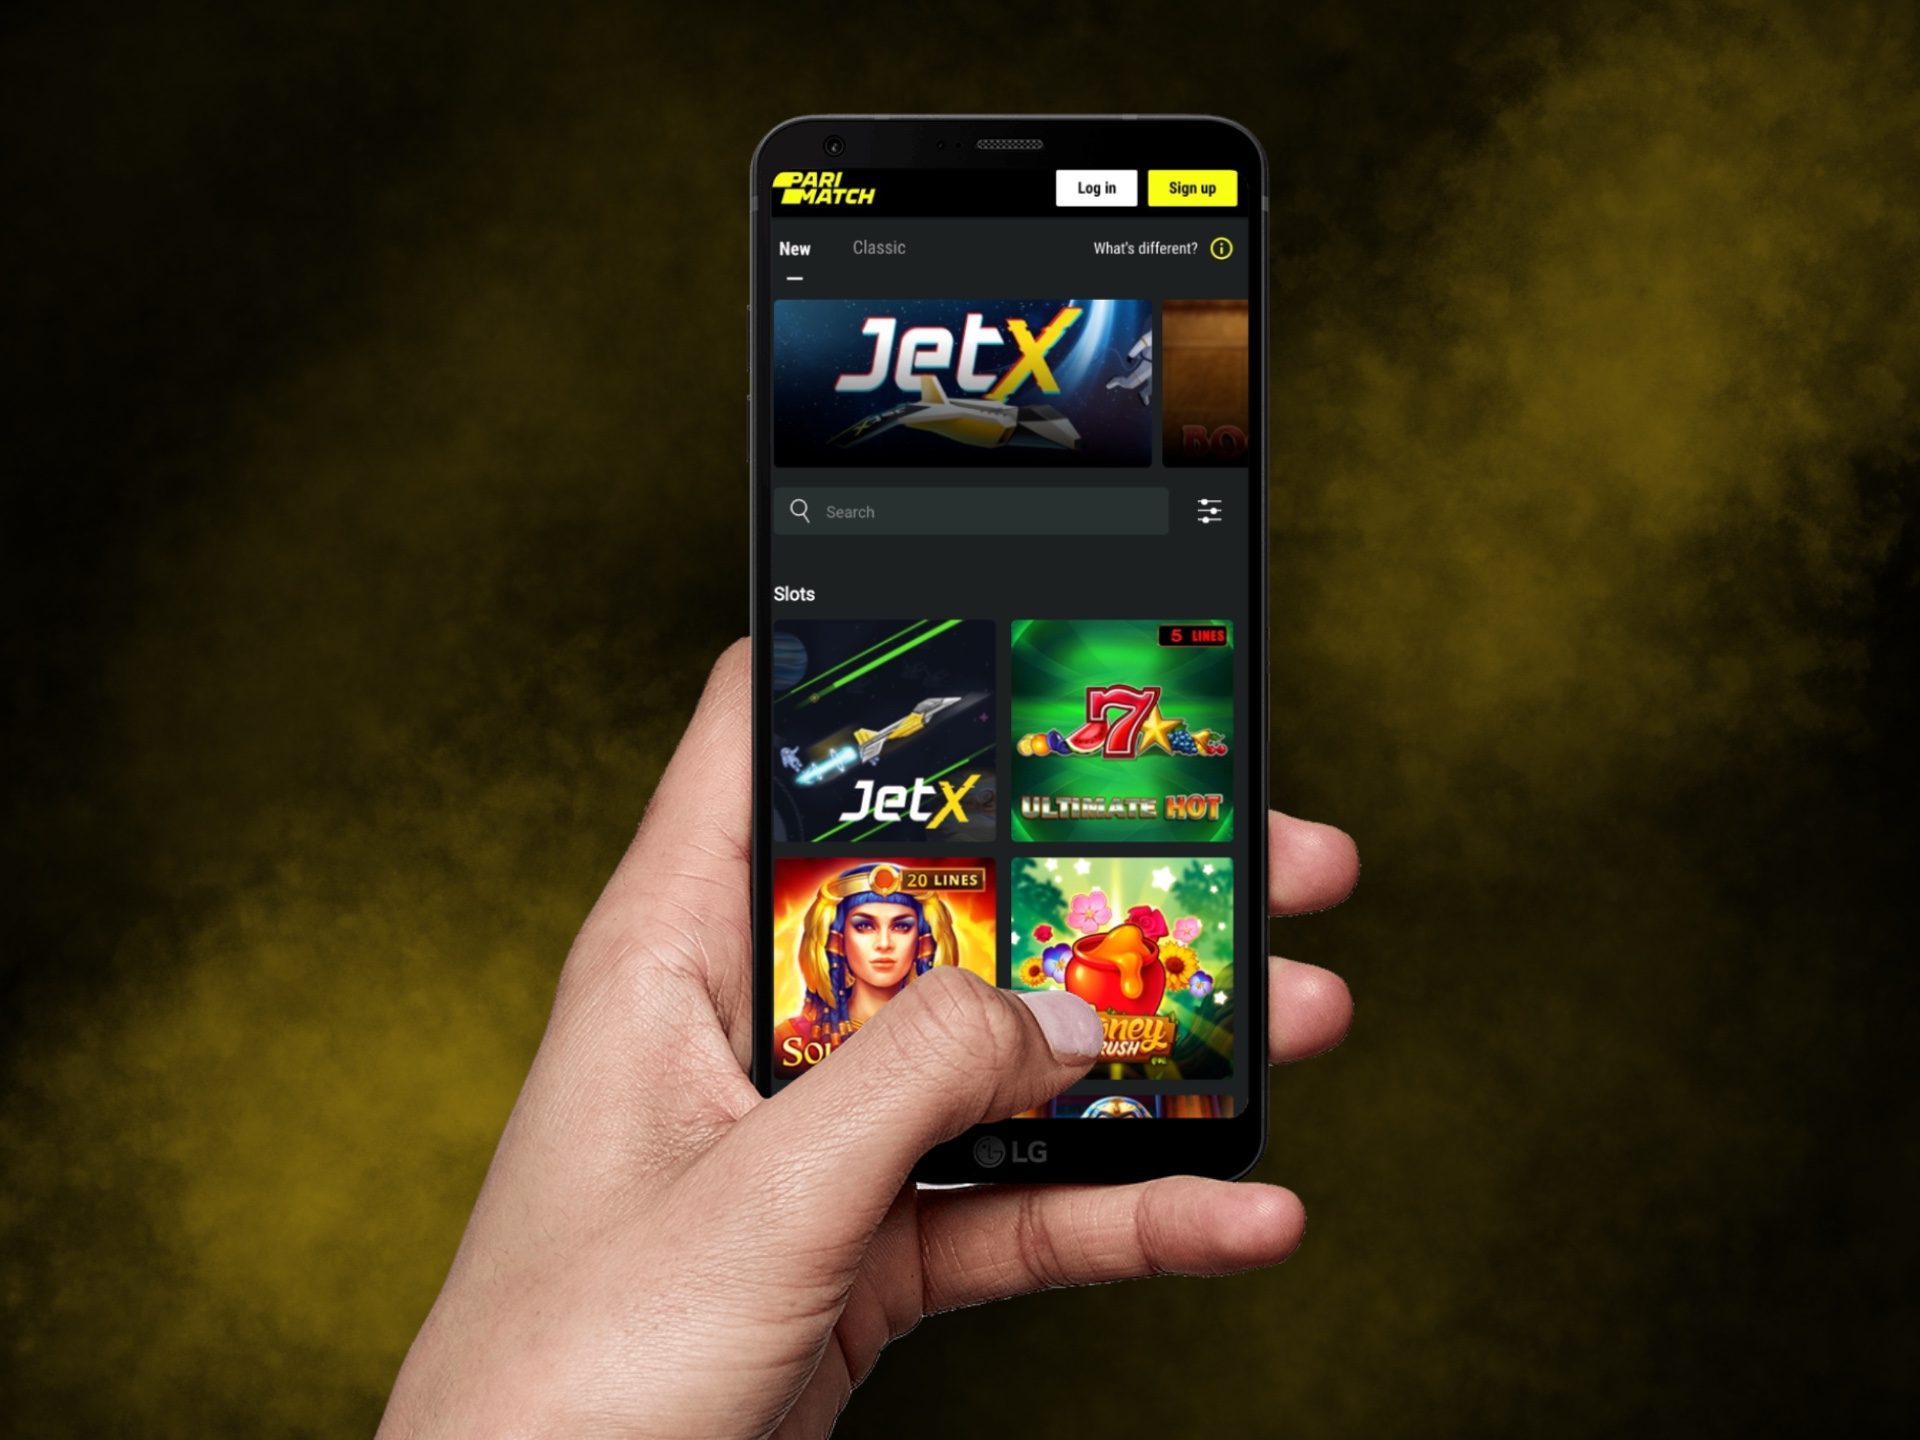 Let your Android phone download from the uknwon sources and install an online casino's mobile app.